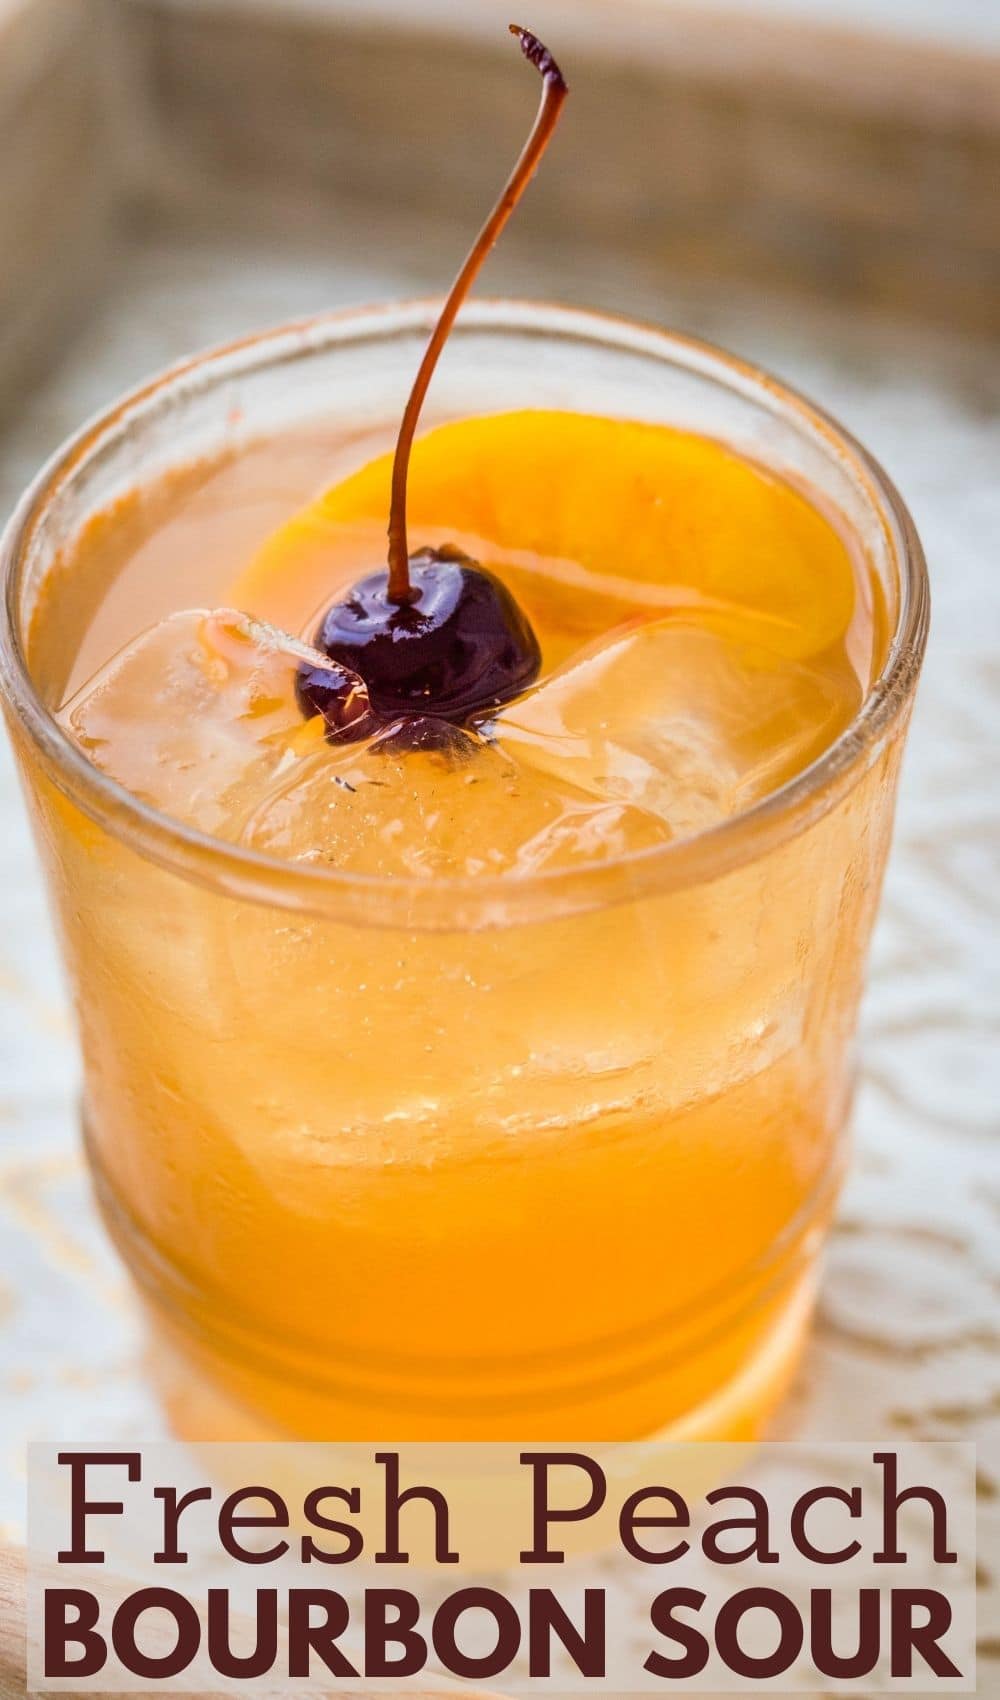 a peach whiskey sour with a cherry and peach garnish.